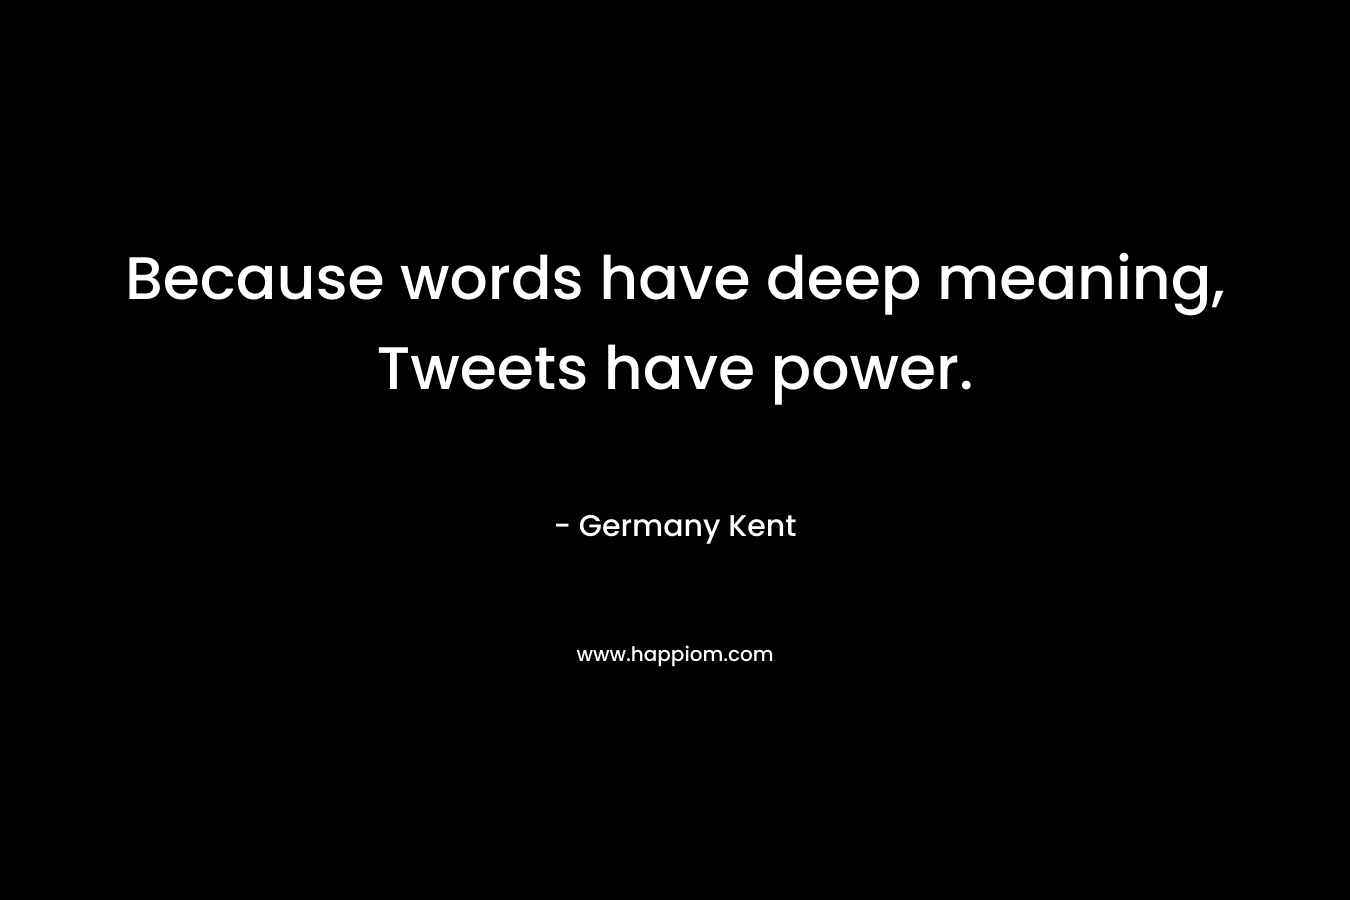 Because words have deep meaning, Tweets have power.